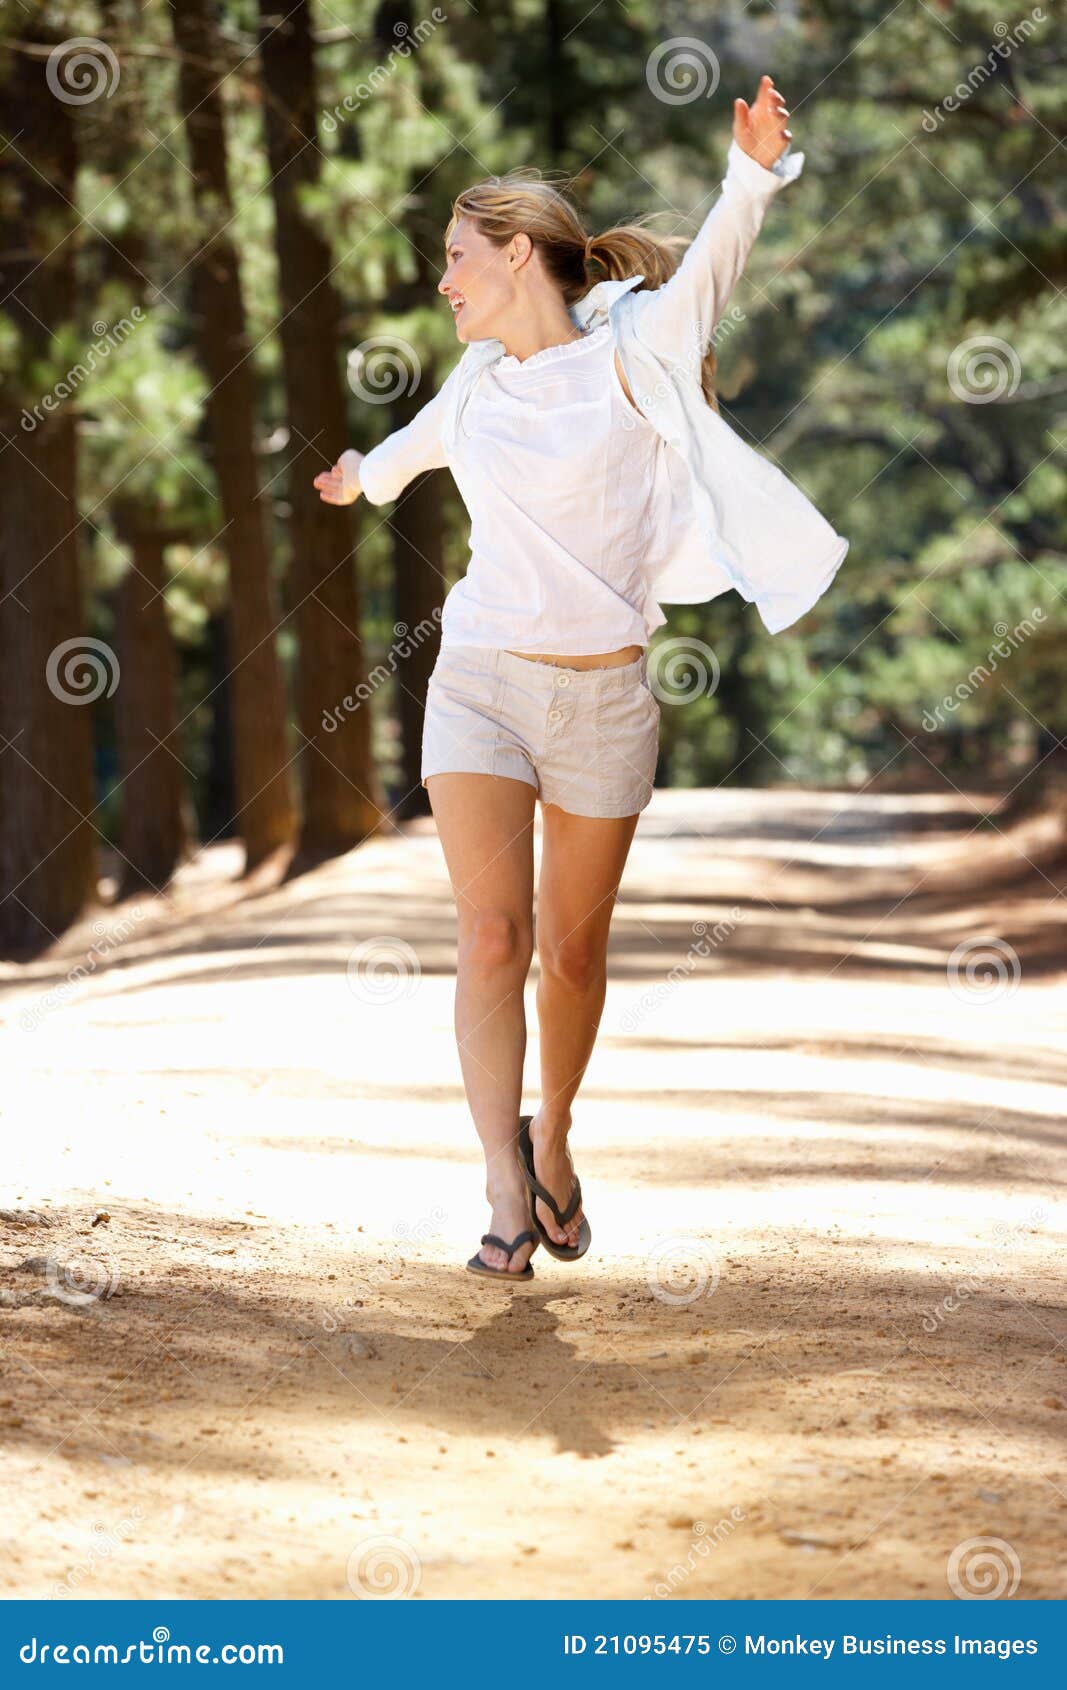 woman running freely along country path